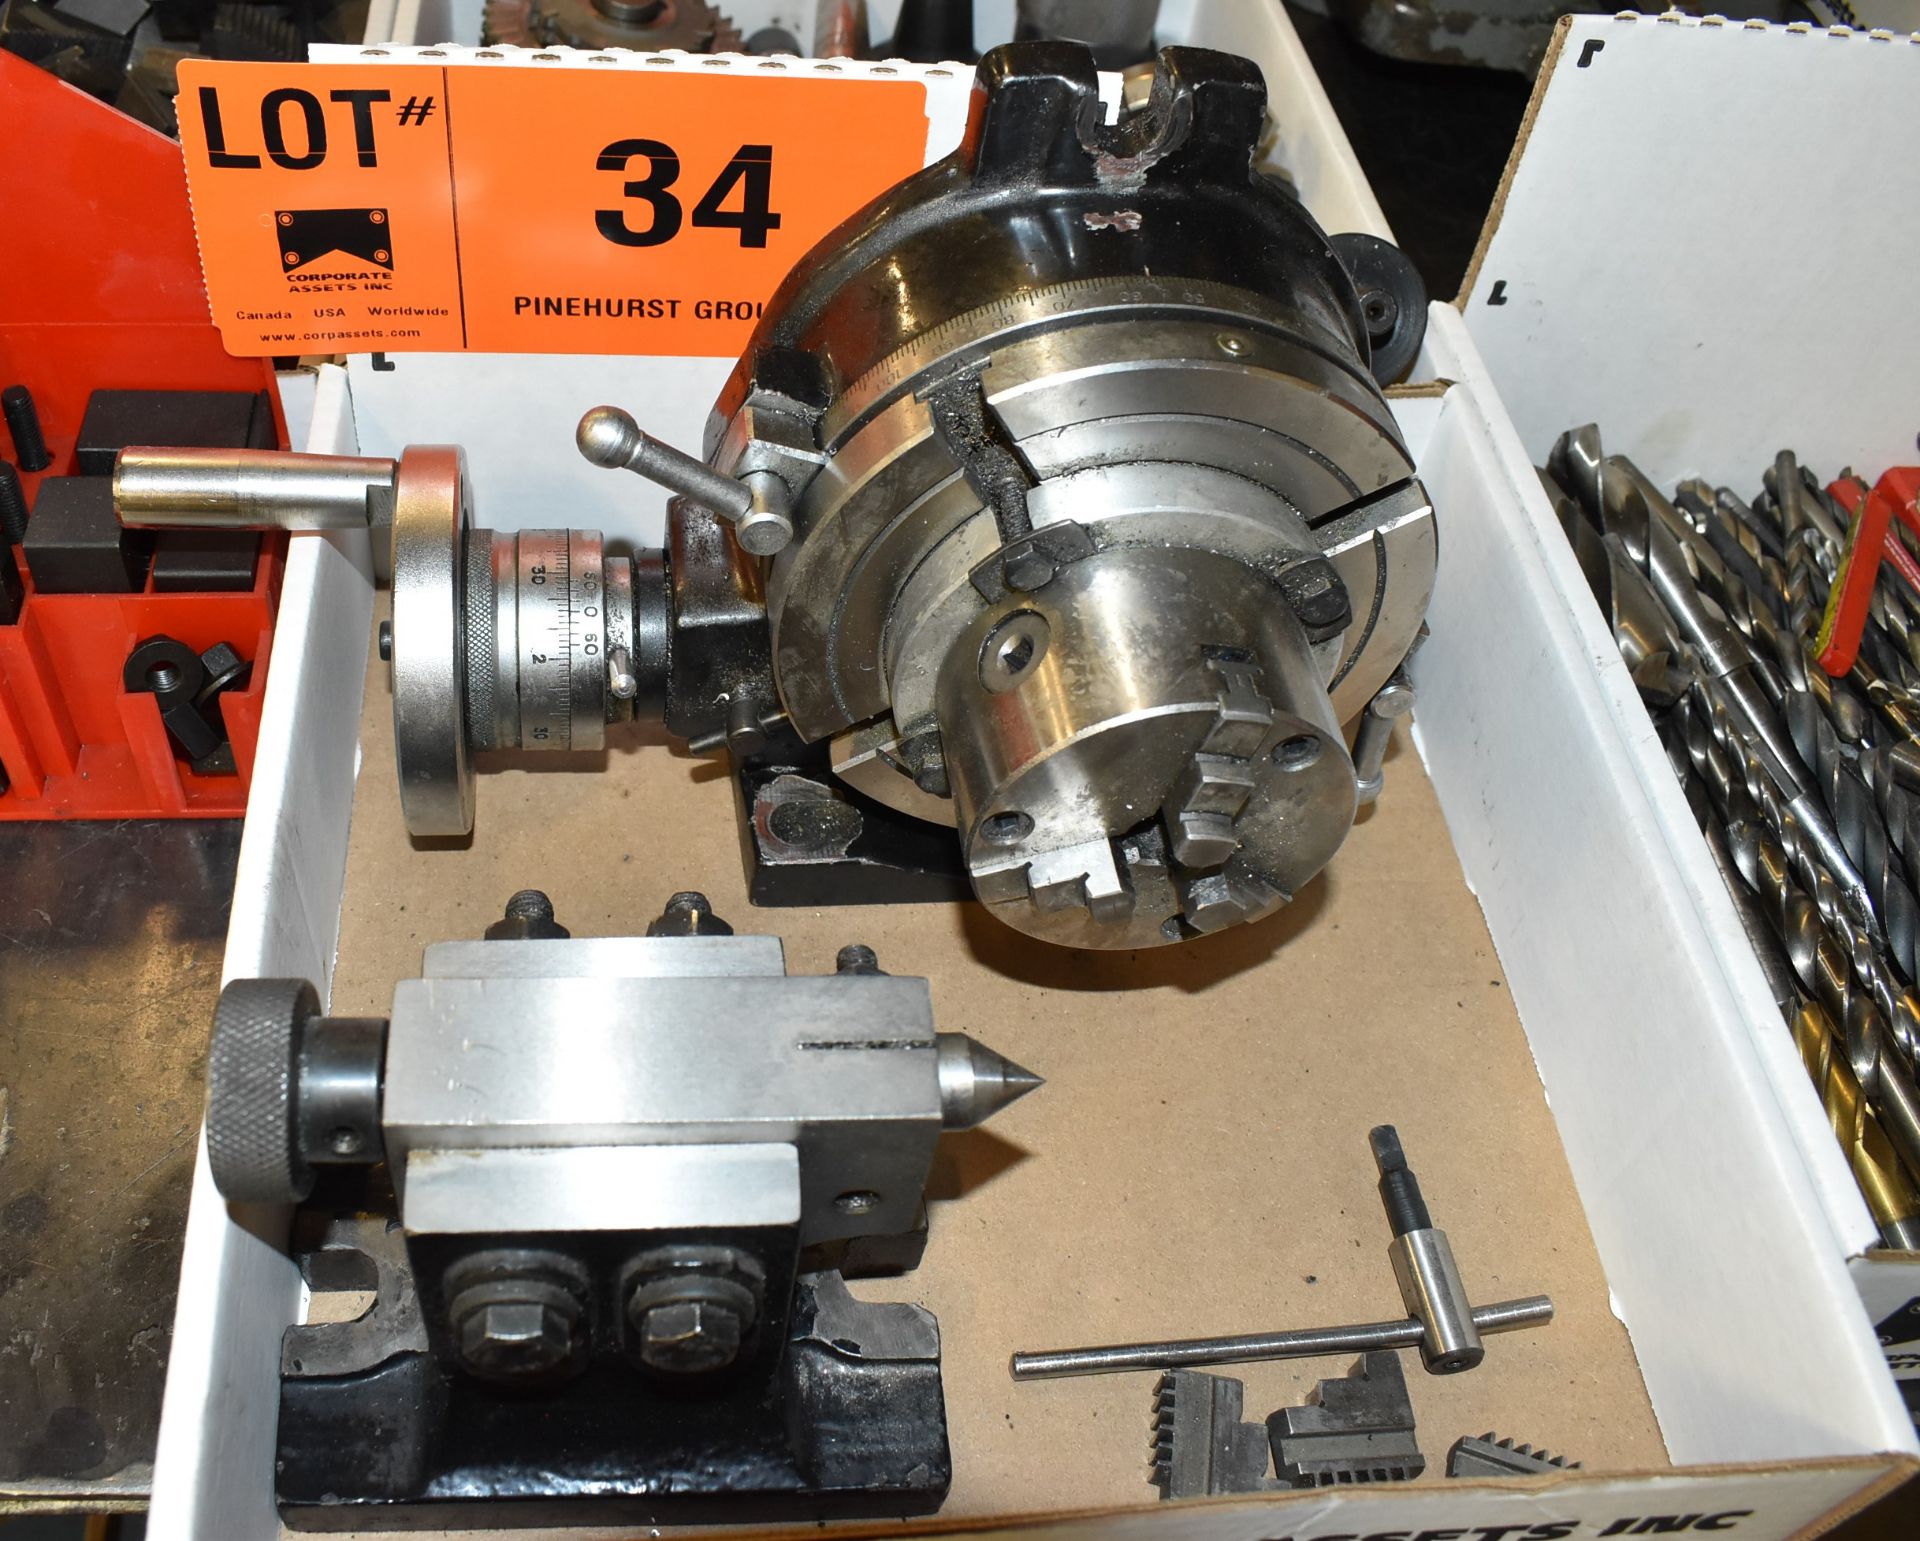 ROTARY INDEXING HEAD WITH 6" DIA. TABLE, 3" 3 JAW CHUCK & TAILSTOCK